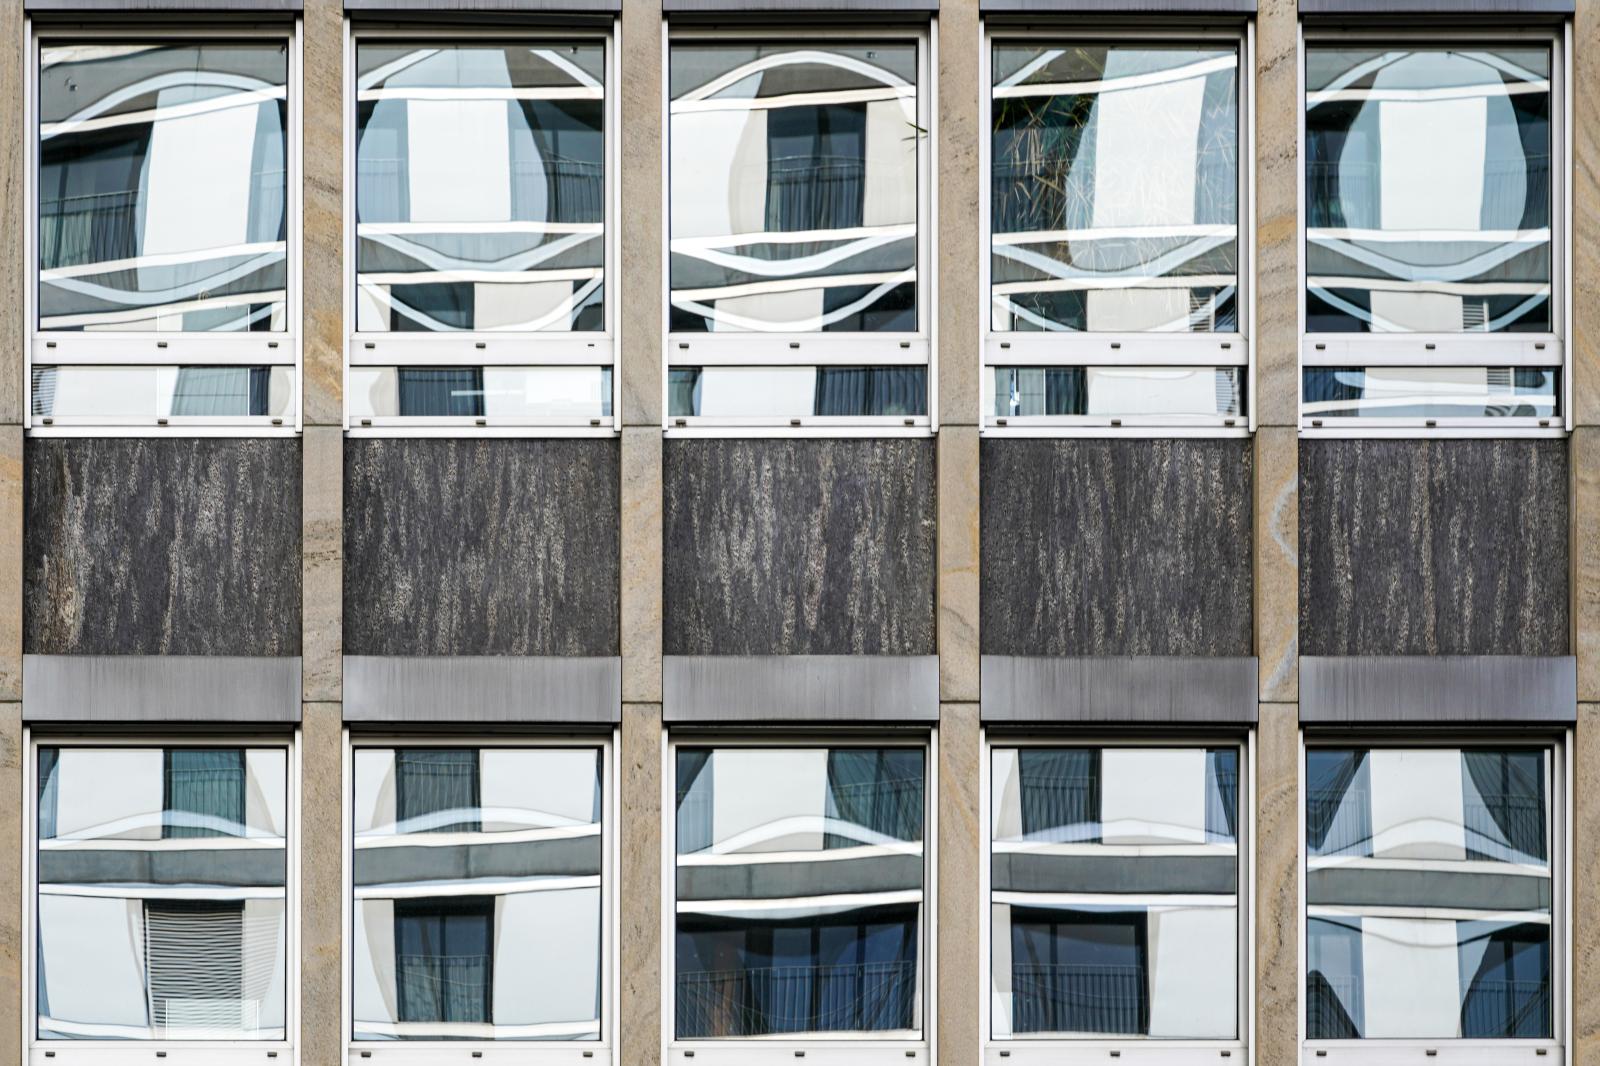 Urban Kaleidoscope: Reflections of Architectural Dialogue | Buy this image